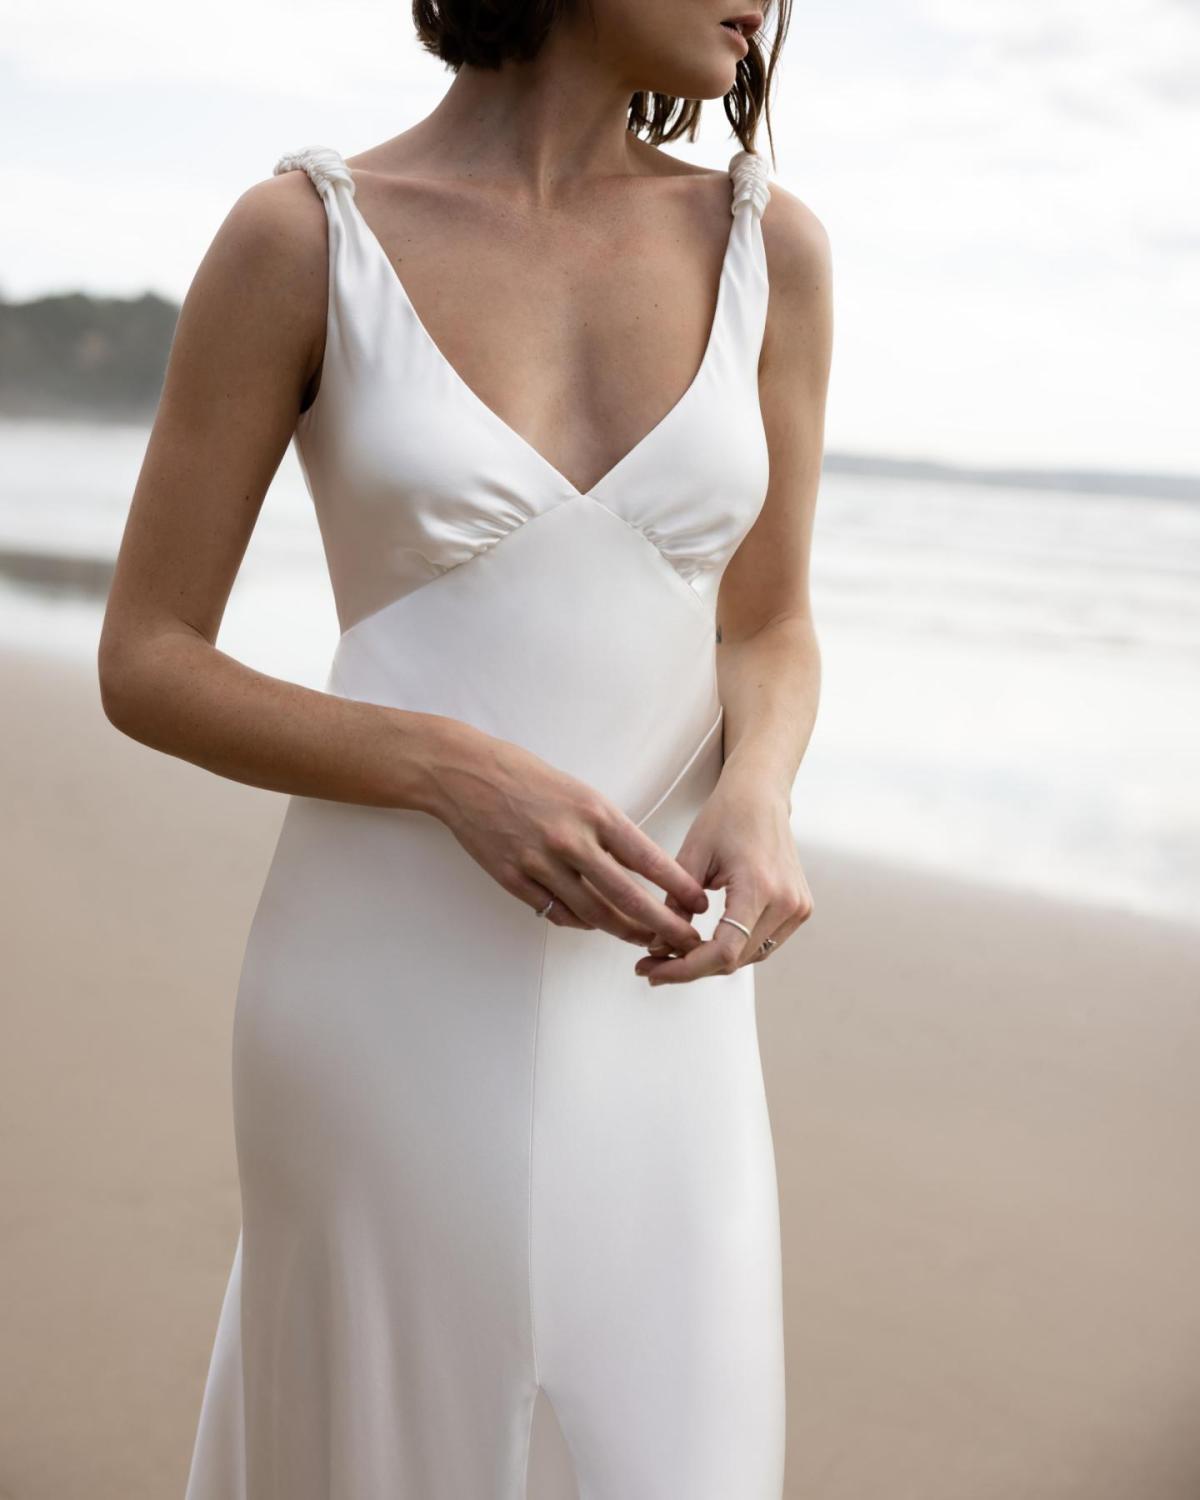 Upclose image of the Athena gown by KWH; a V-neck silk slip wedding dress with leg split and open back.